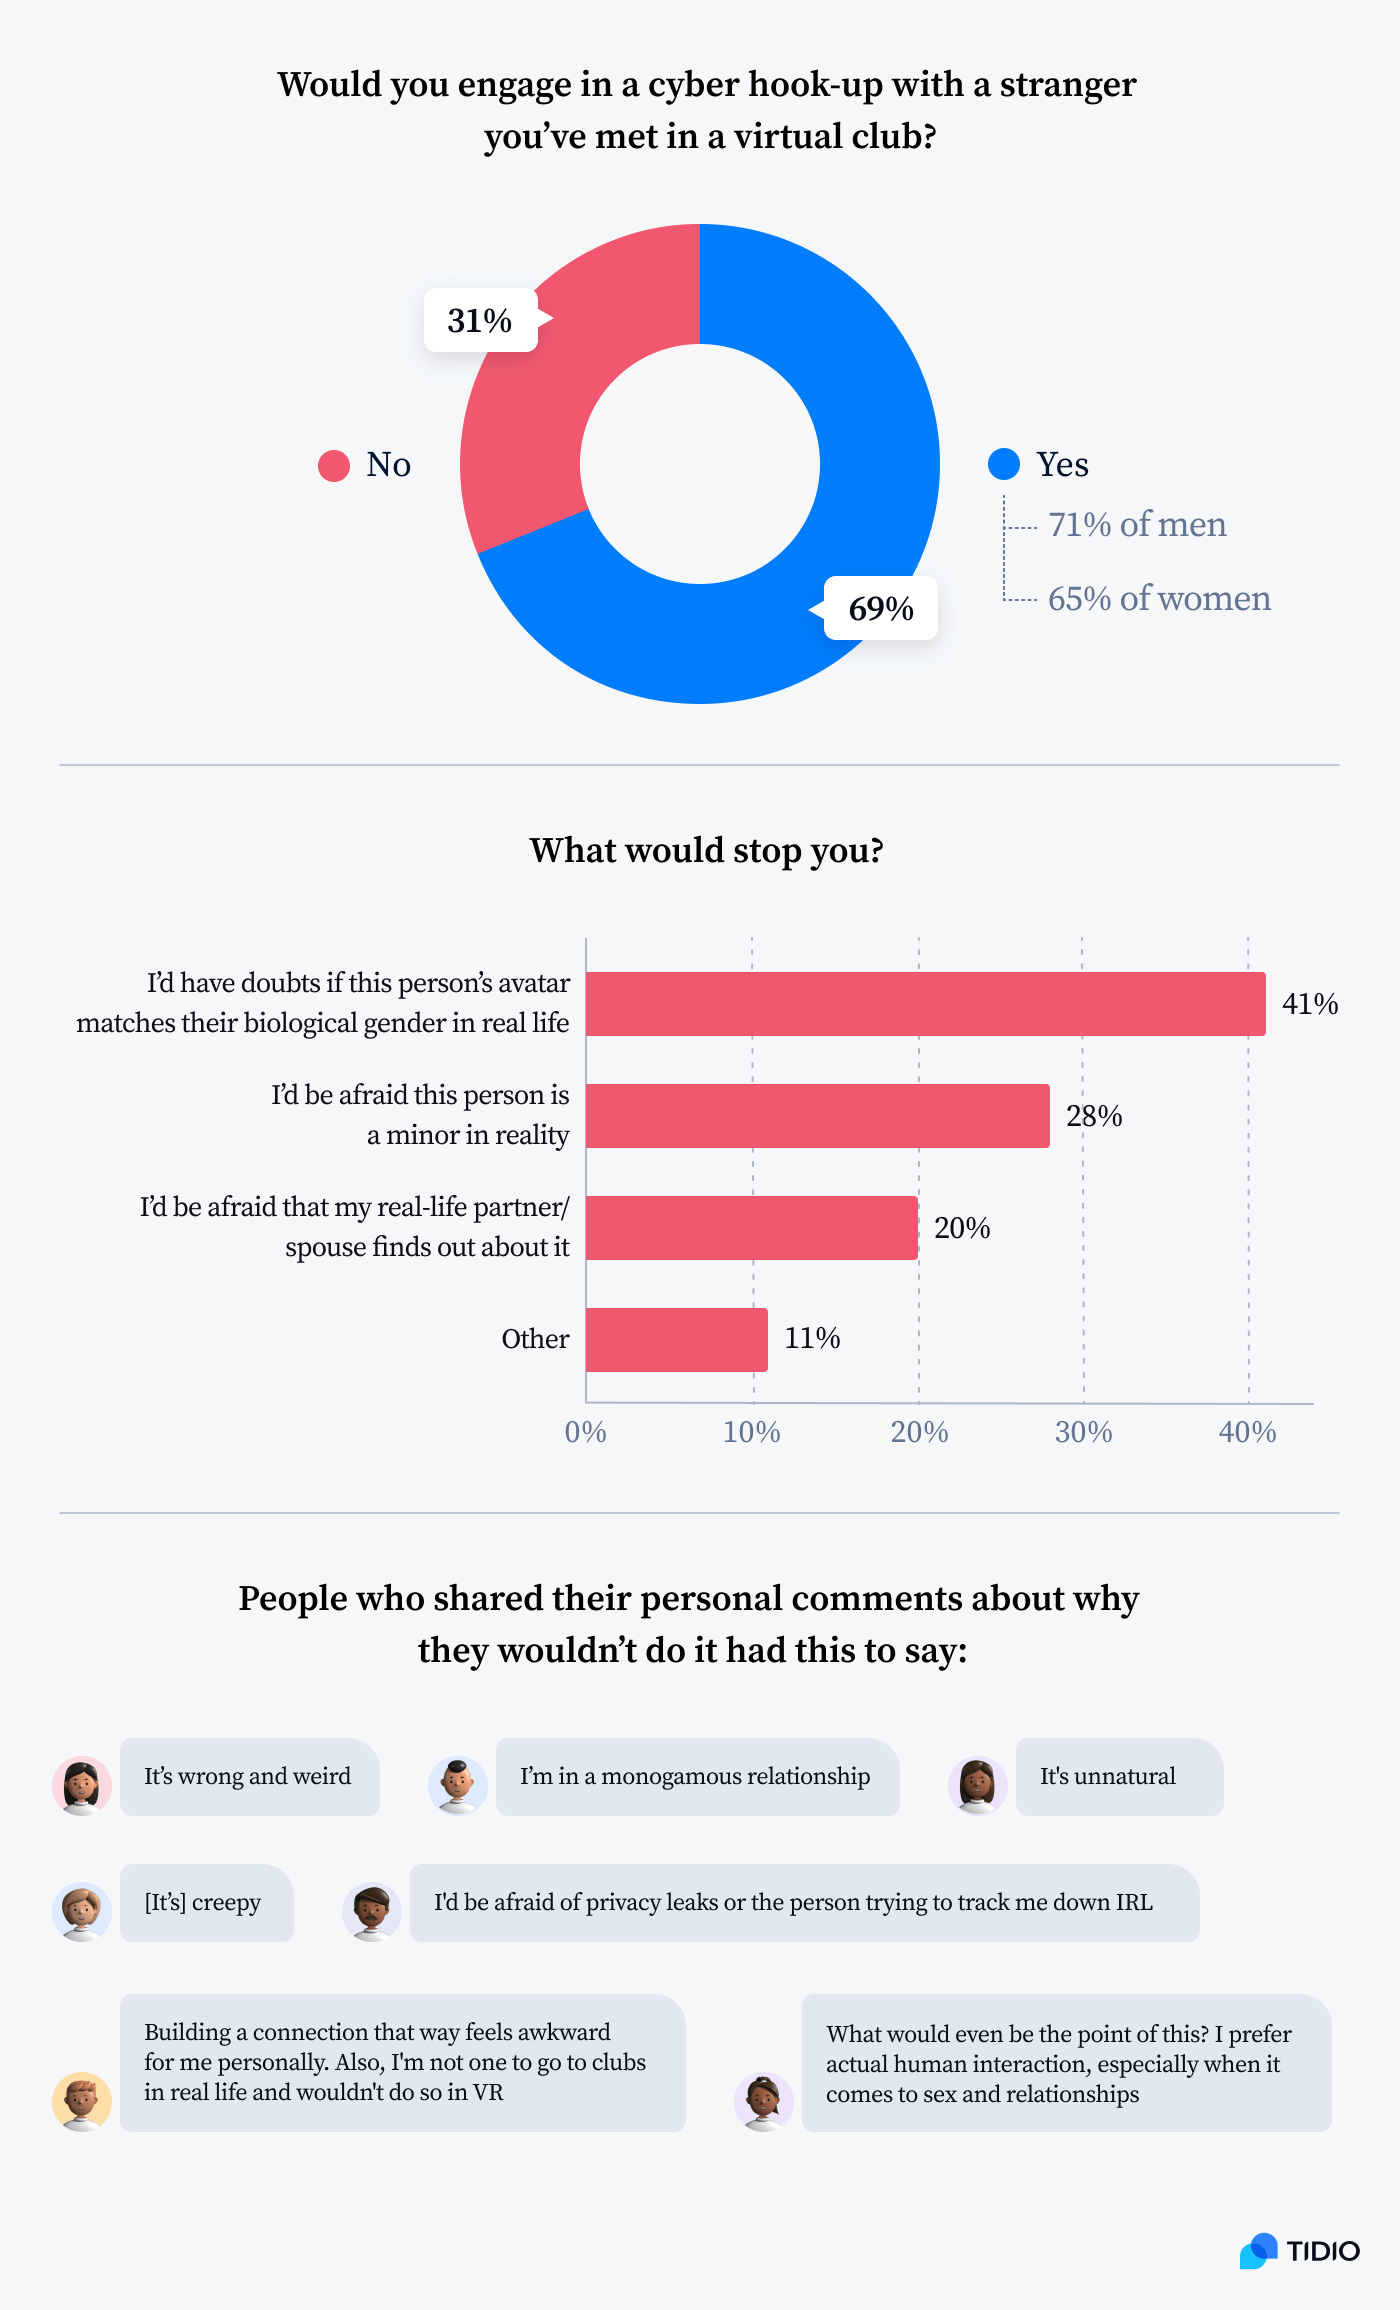 An infographic presenting if people would engage in a cyber hook up with a stranger they've met in a virtual club and what would stop them, based on the respondents answers